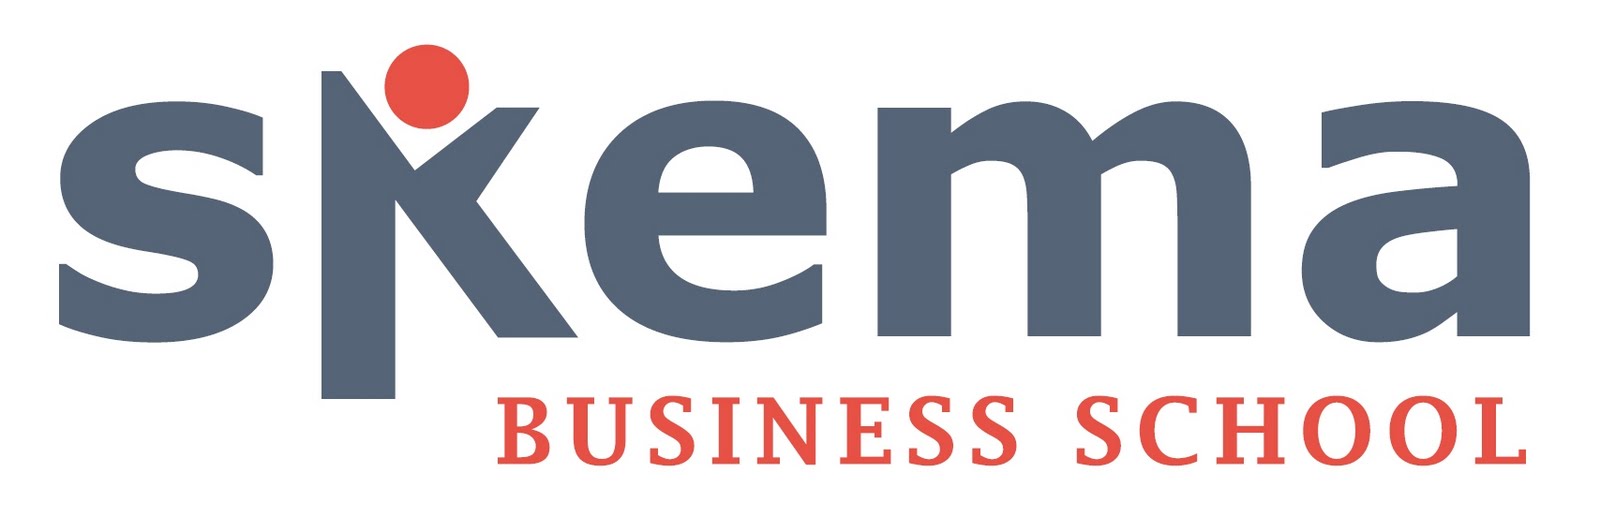 Study in SKEMA Business School with Scholarship